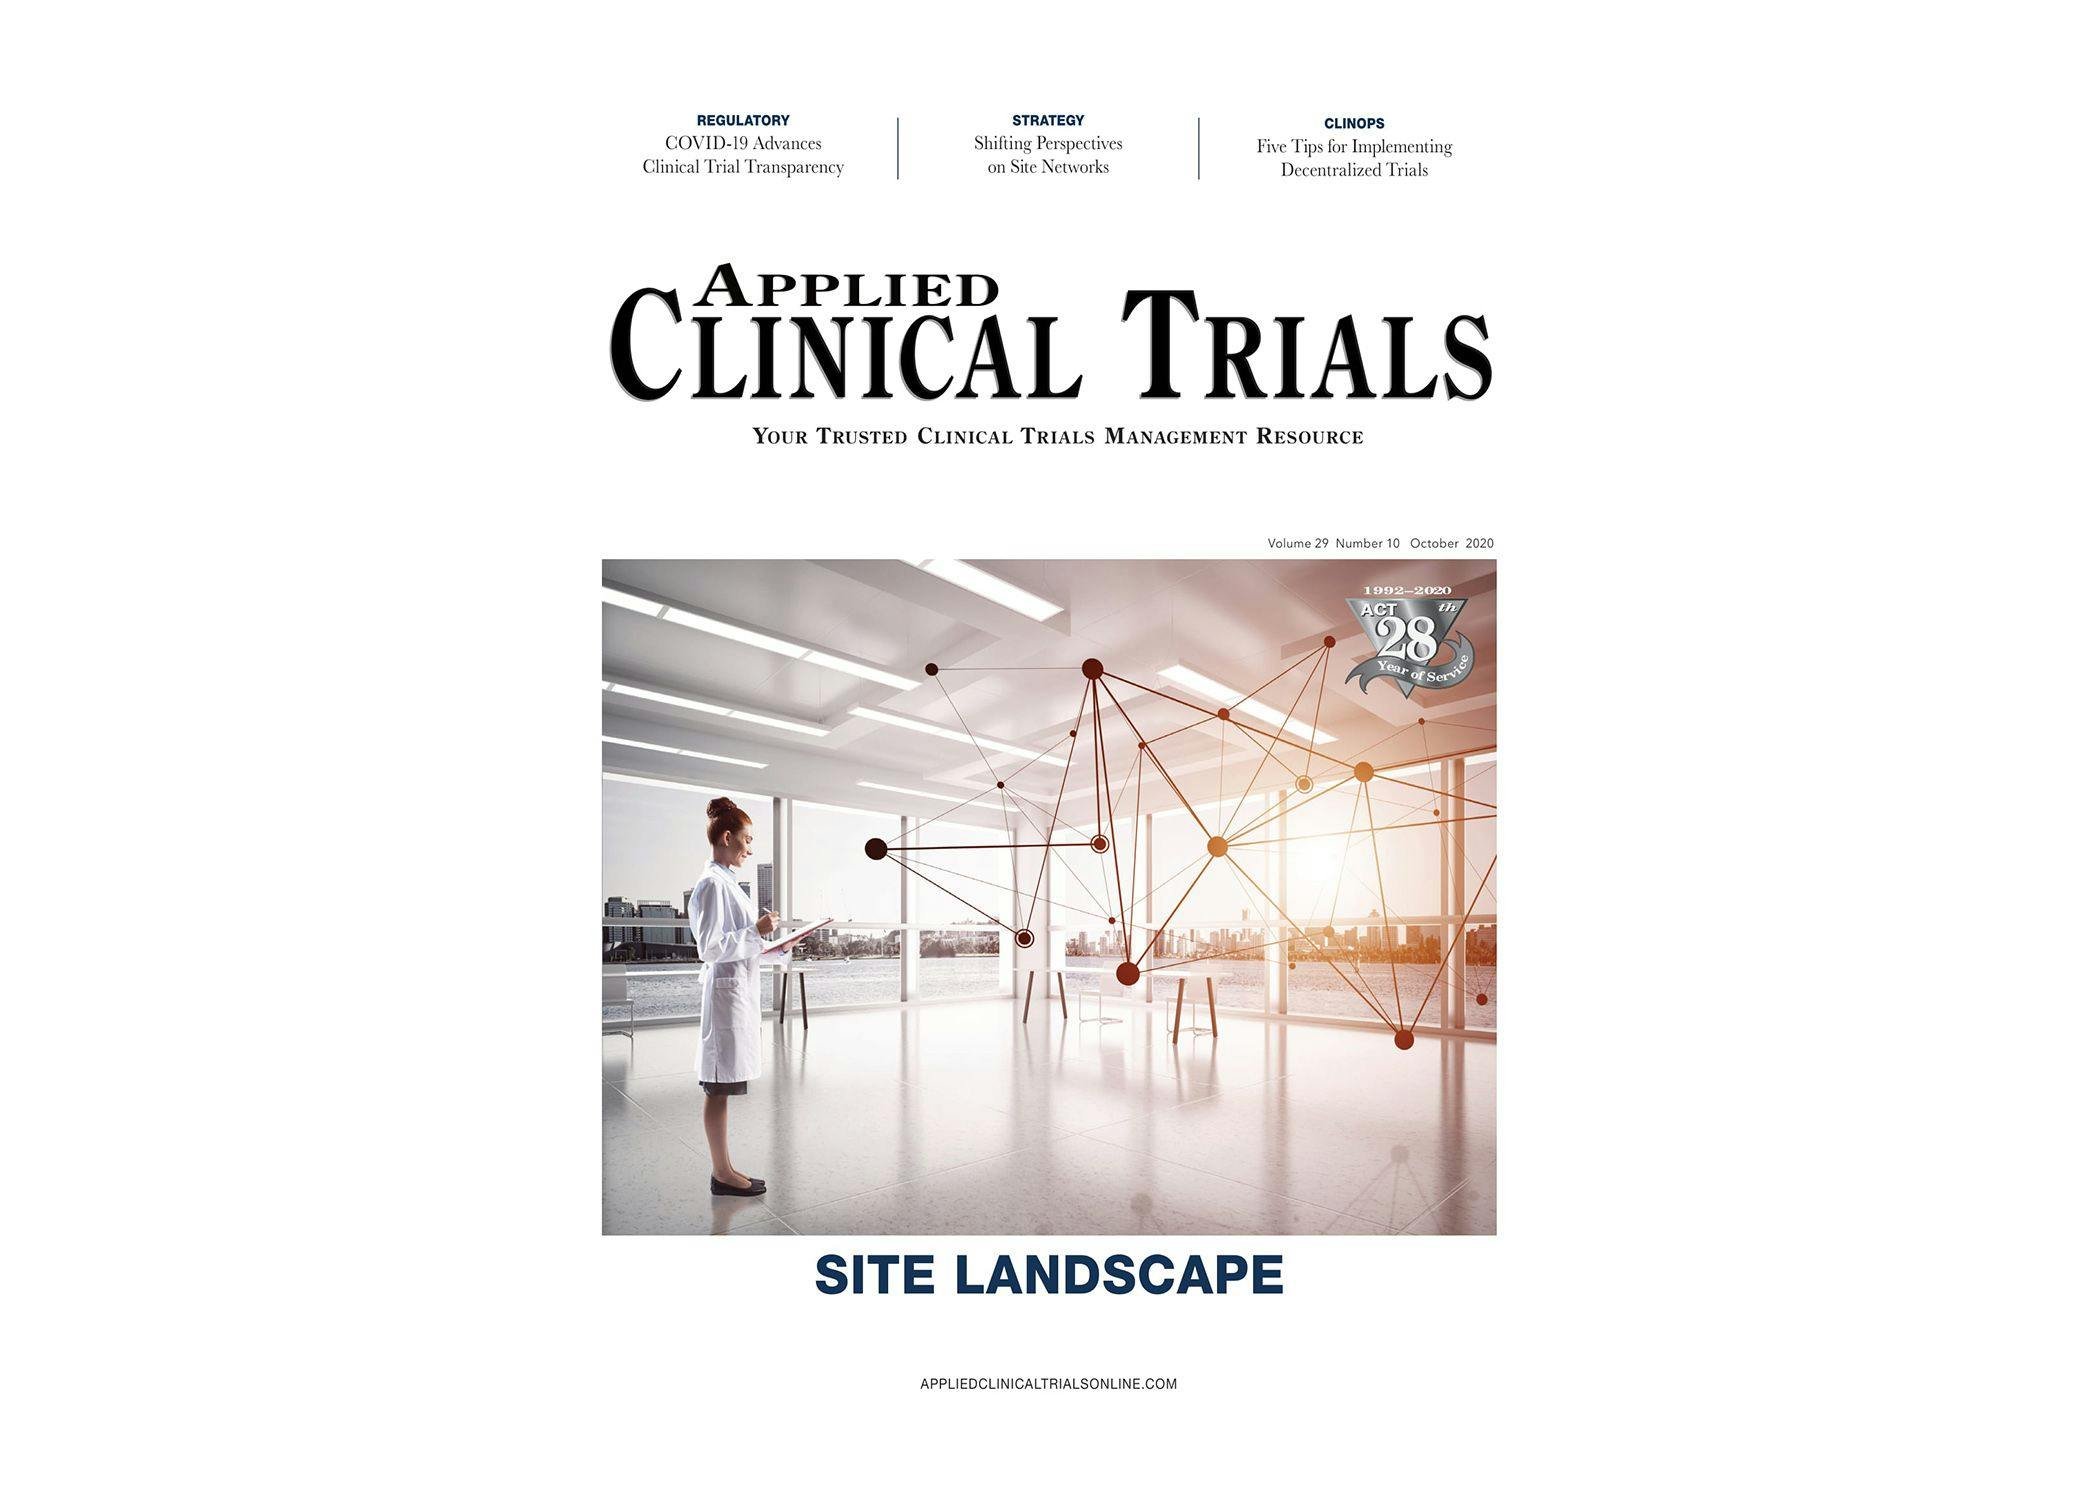 Applied Clinical Trials, October 2020 Issue (PDF)